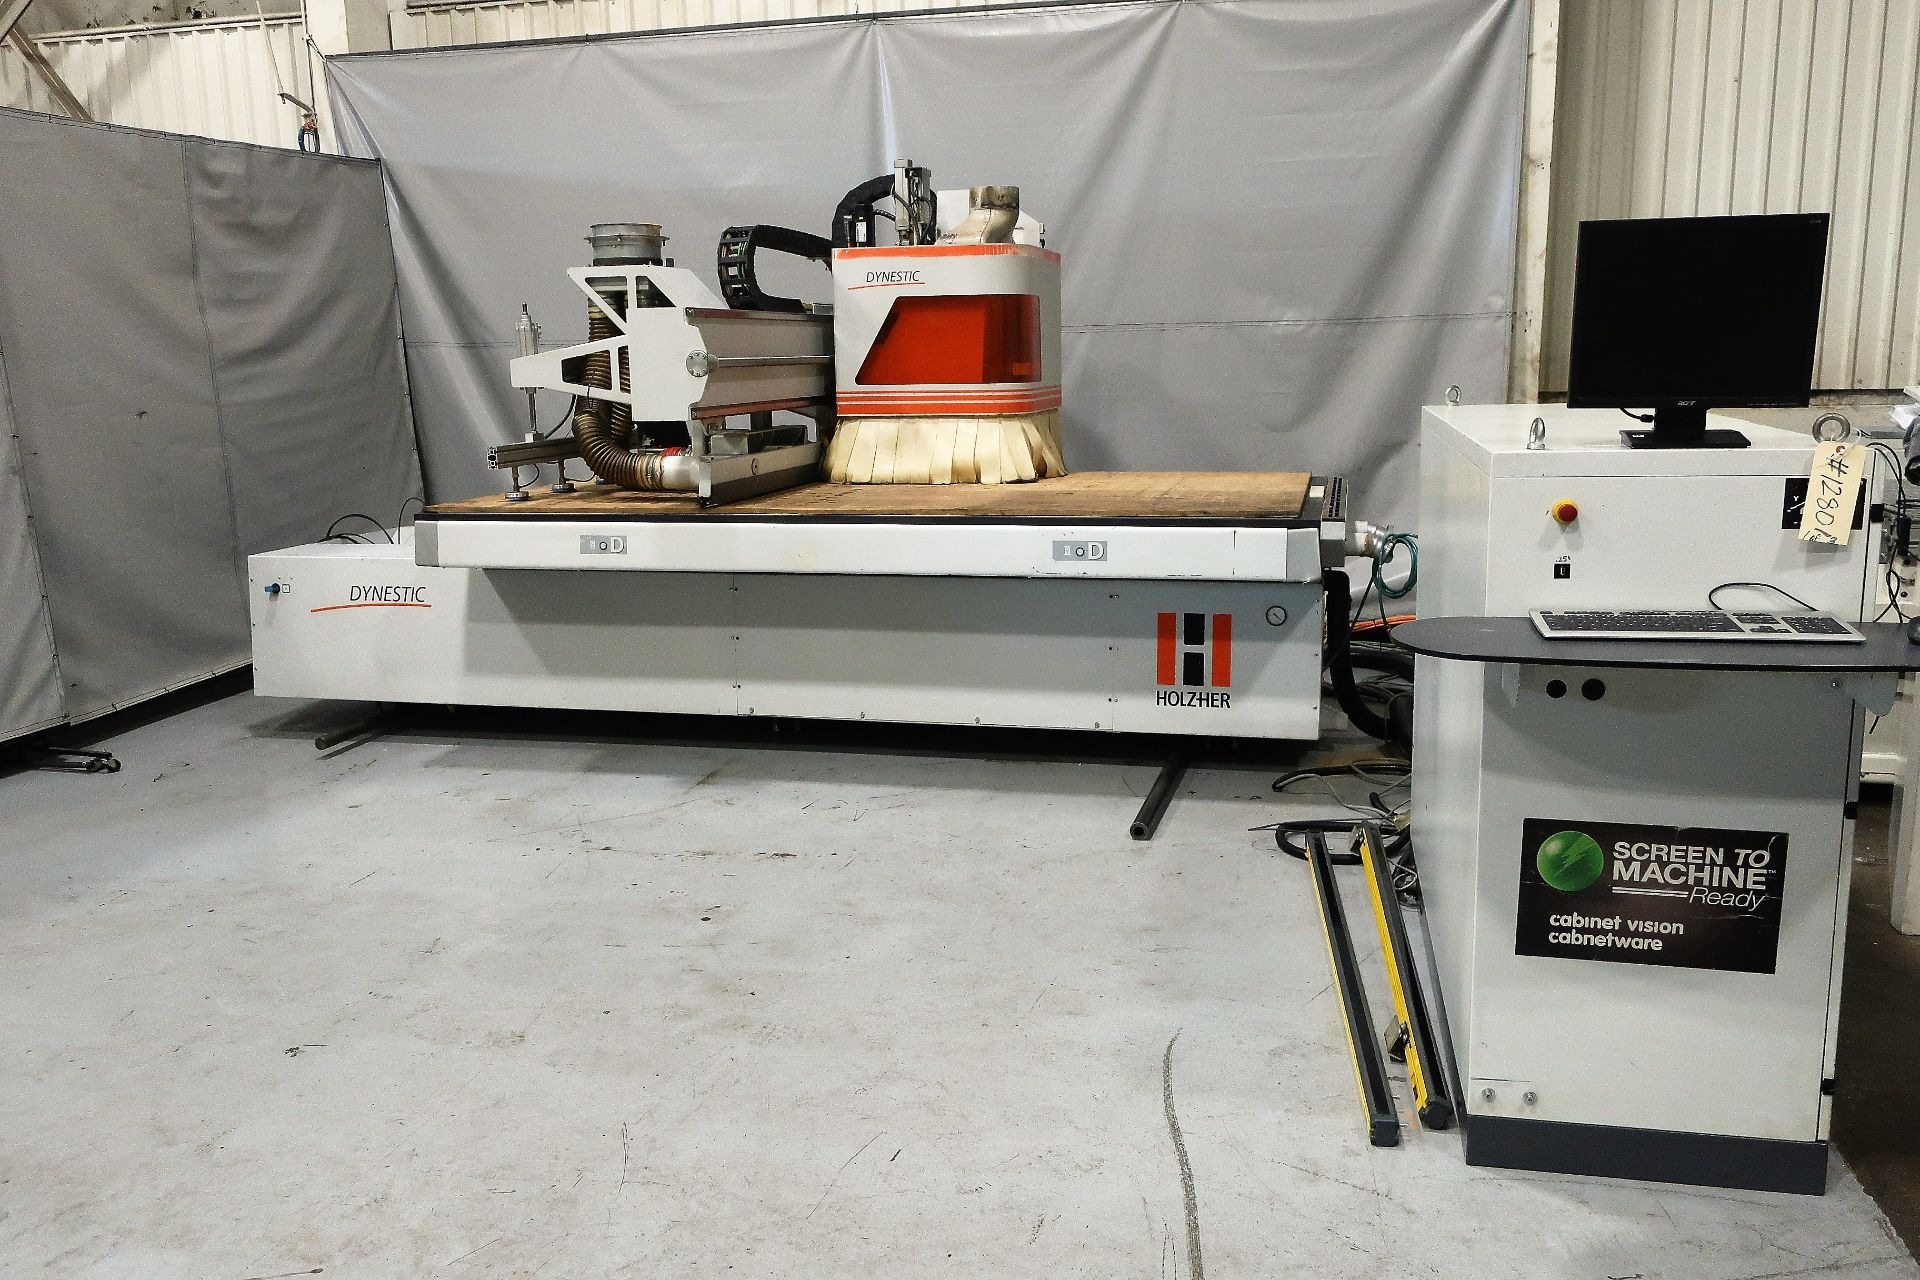 5'X10' HOLZHER MODEL DYNESTIC 7516 CNC ROUTER, S/N 27/1-102, NEW 2011